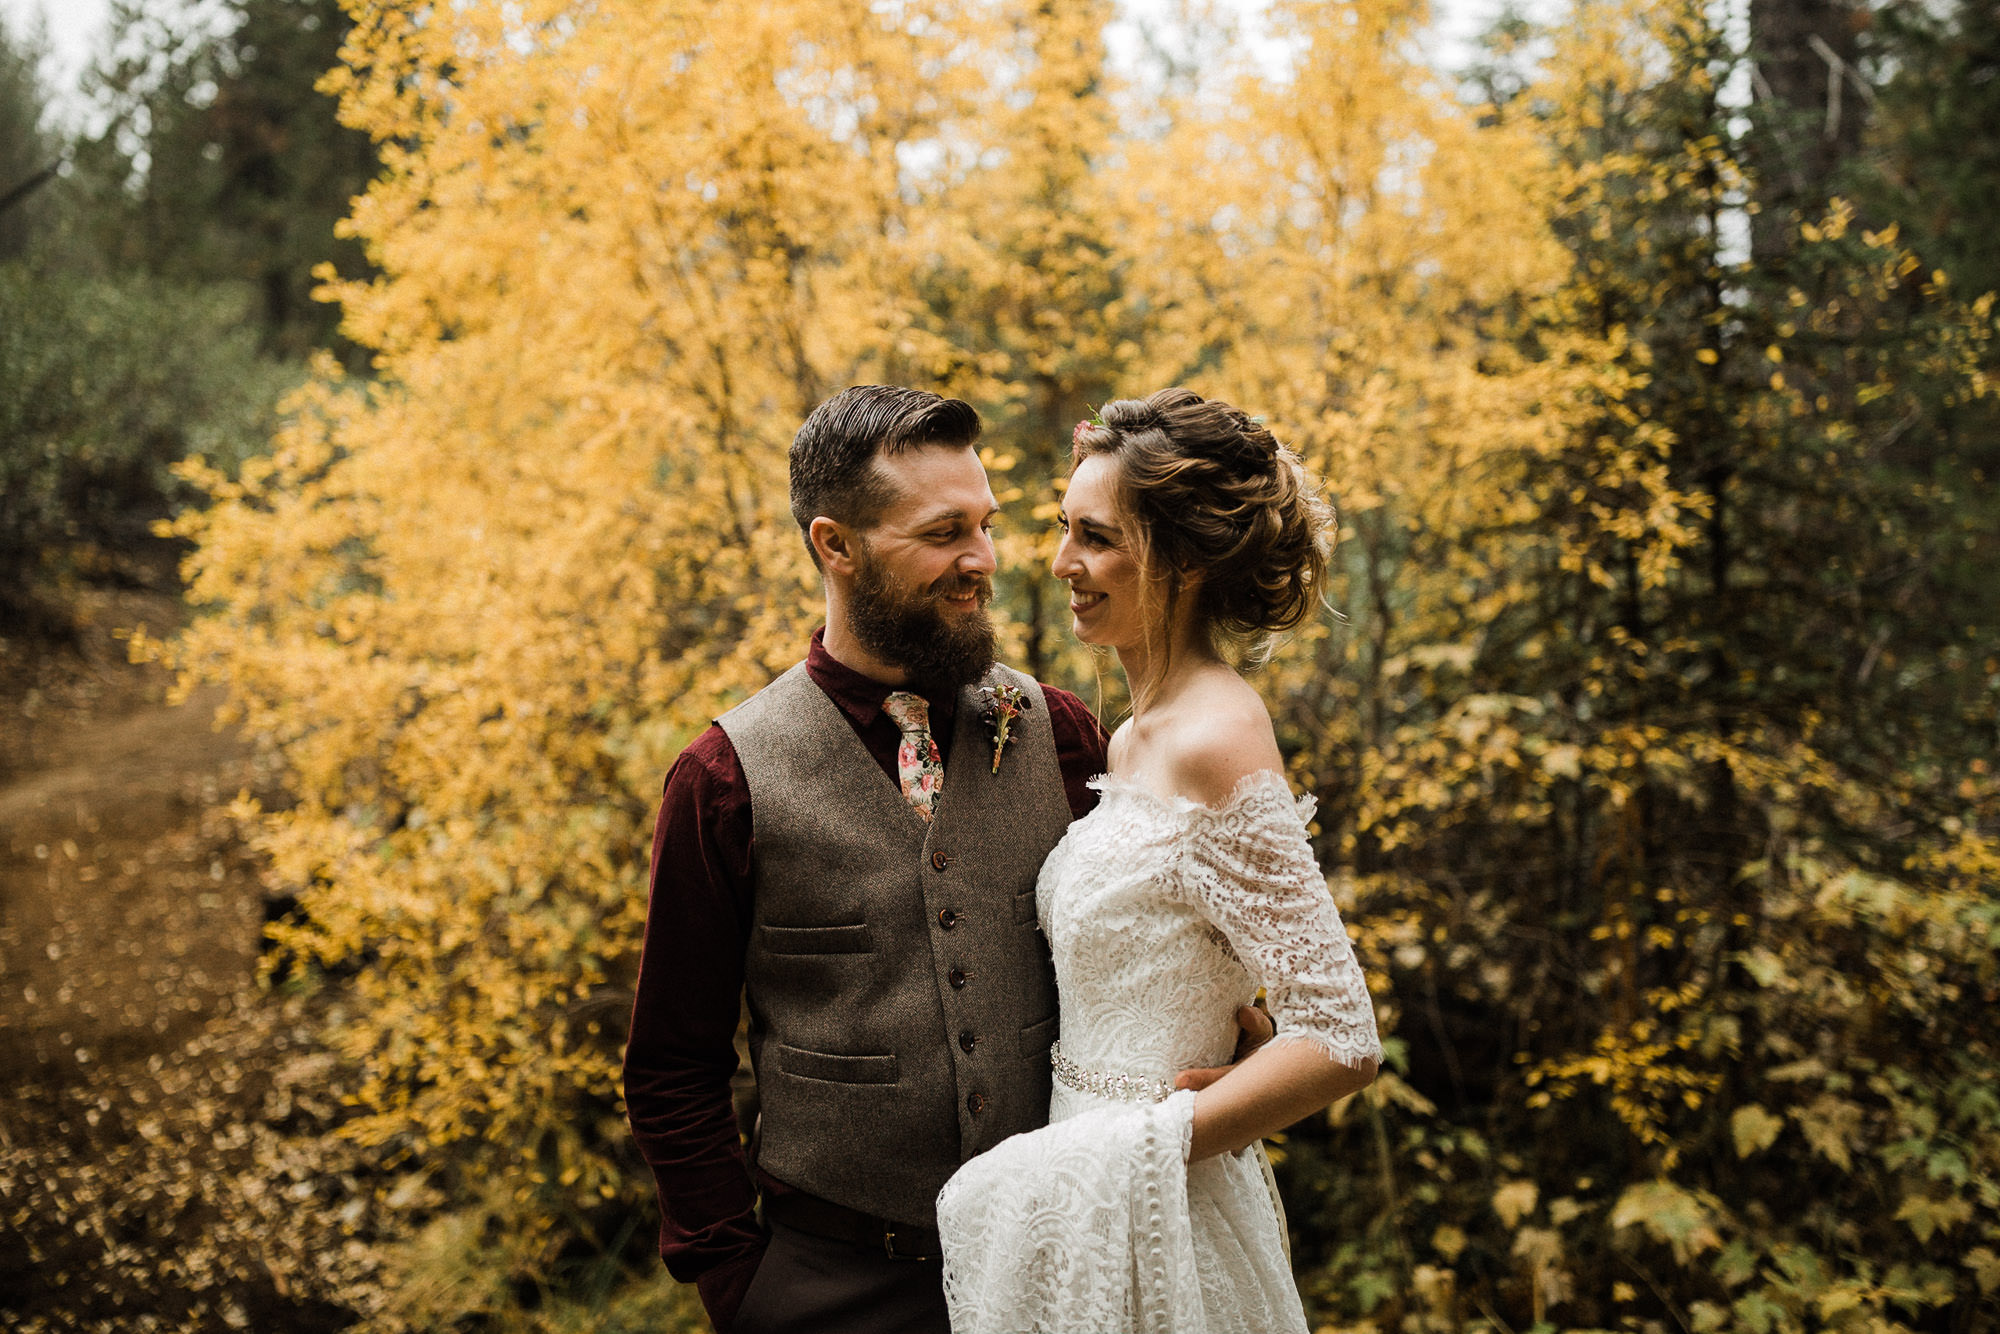 Bride and groom pose in front of fall foliage in Bend, Oregon